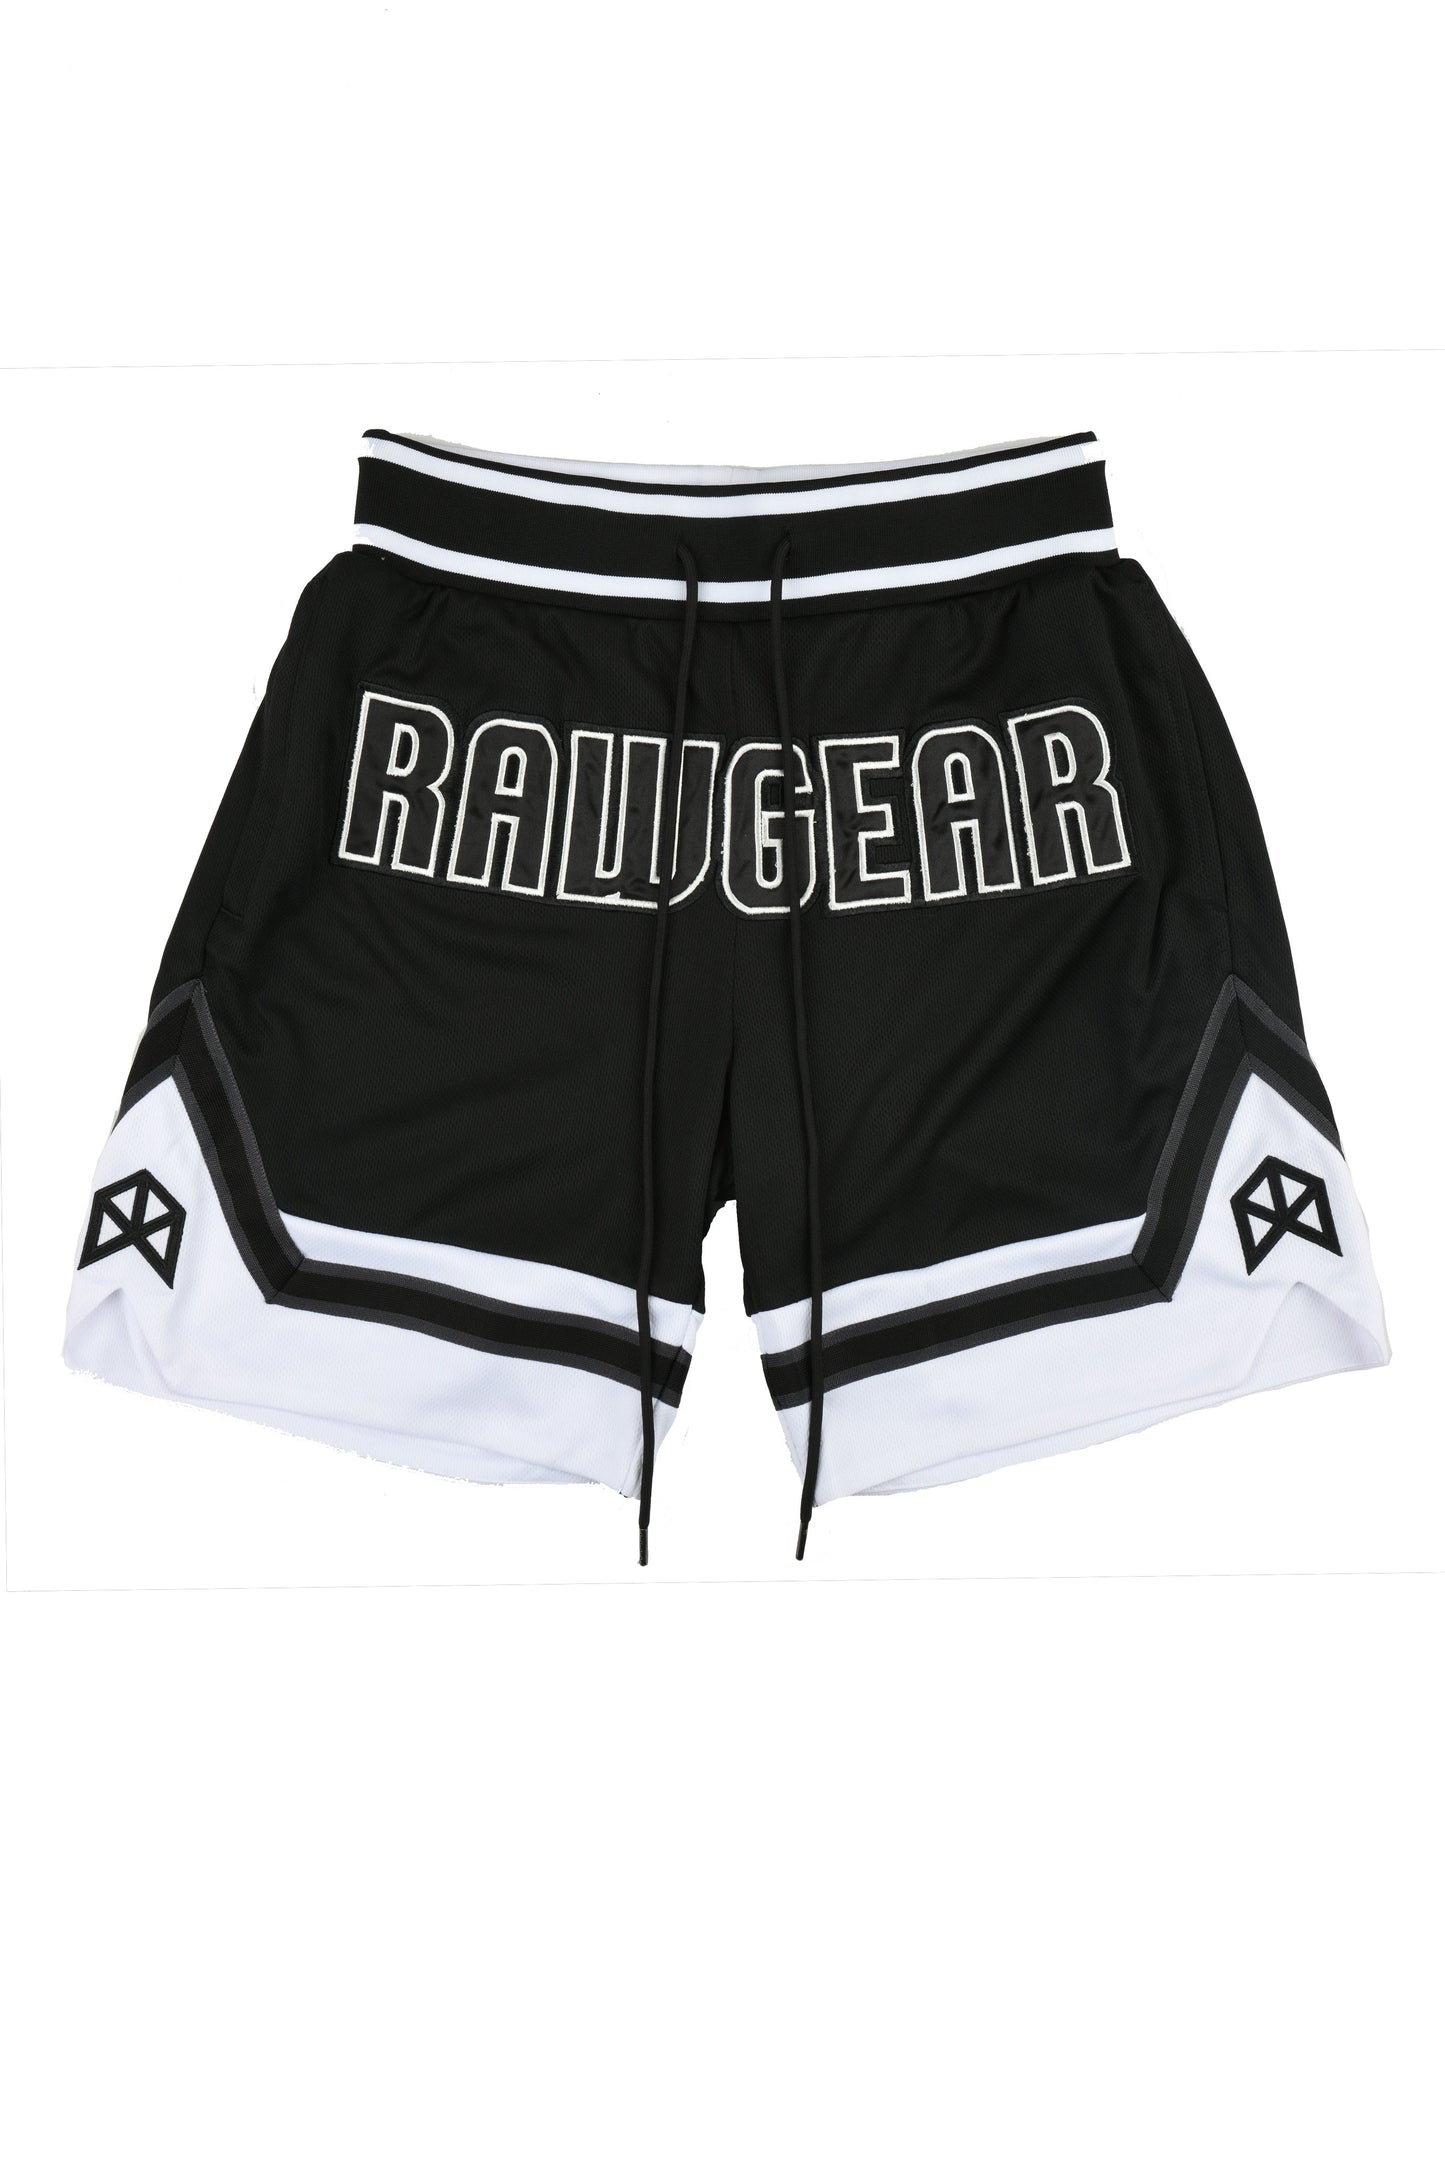 BMFITGEAR Rawgear Front Embroidery Basketball Shorts Red/White / 2x